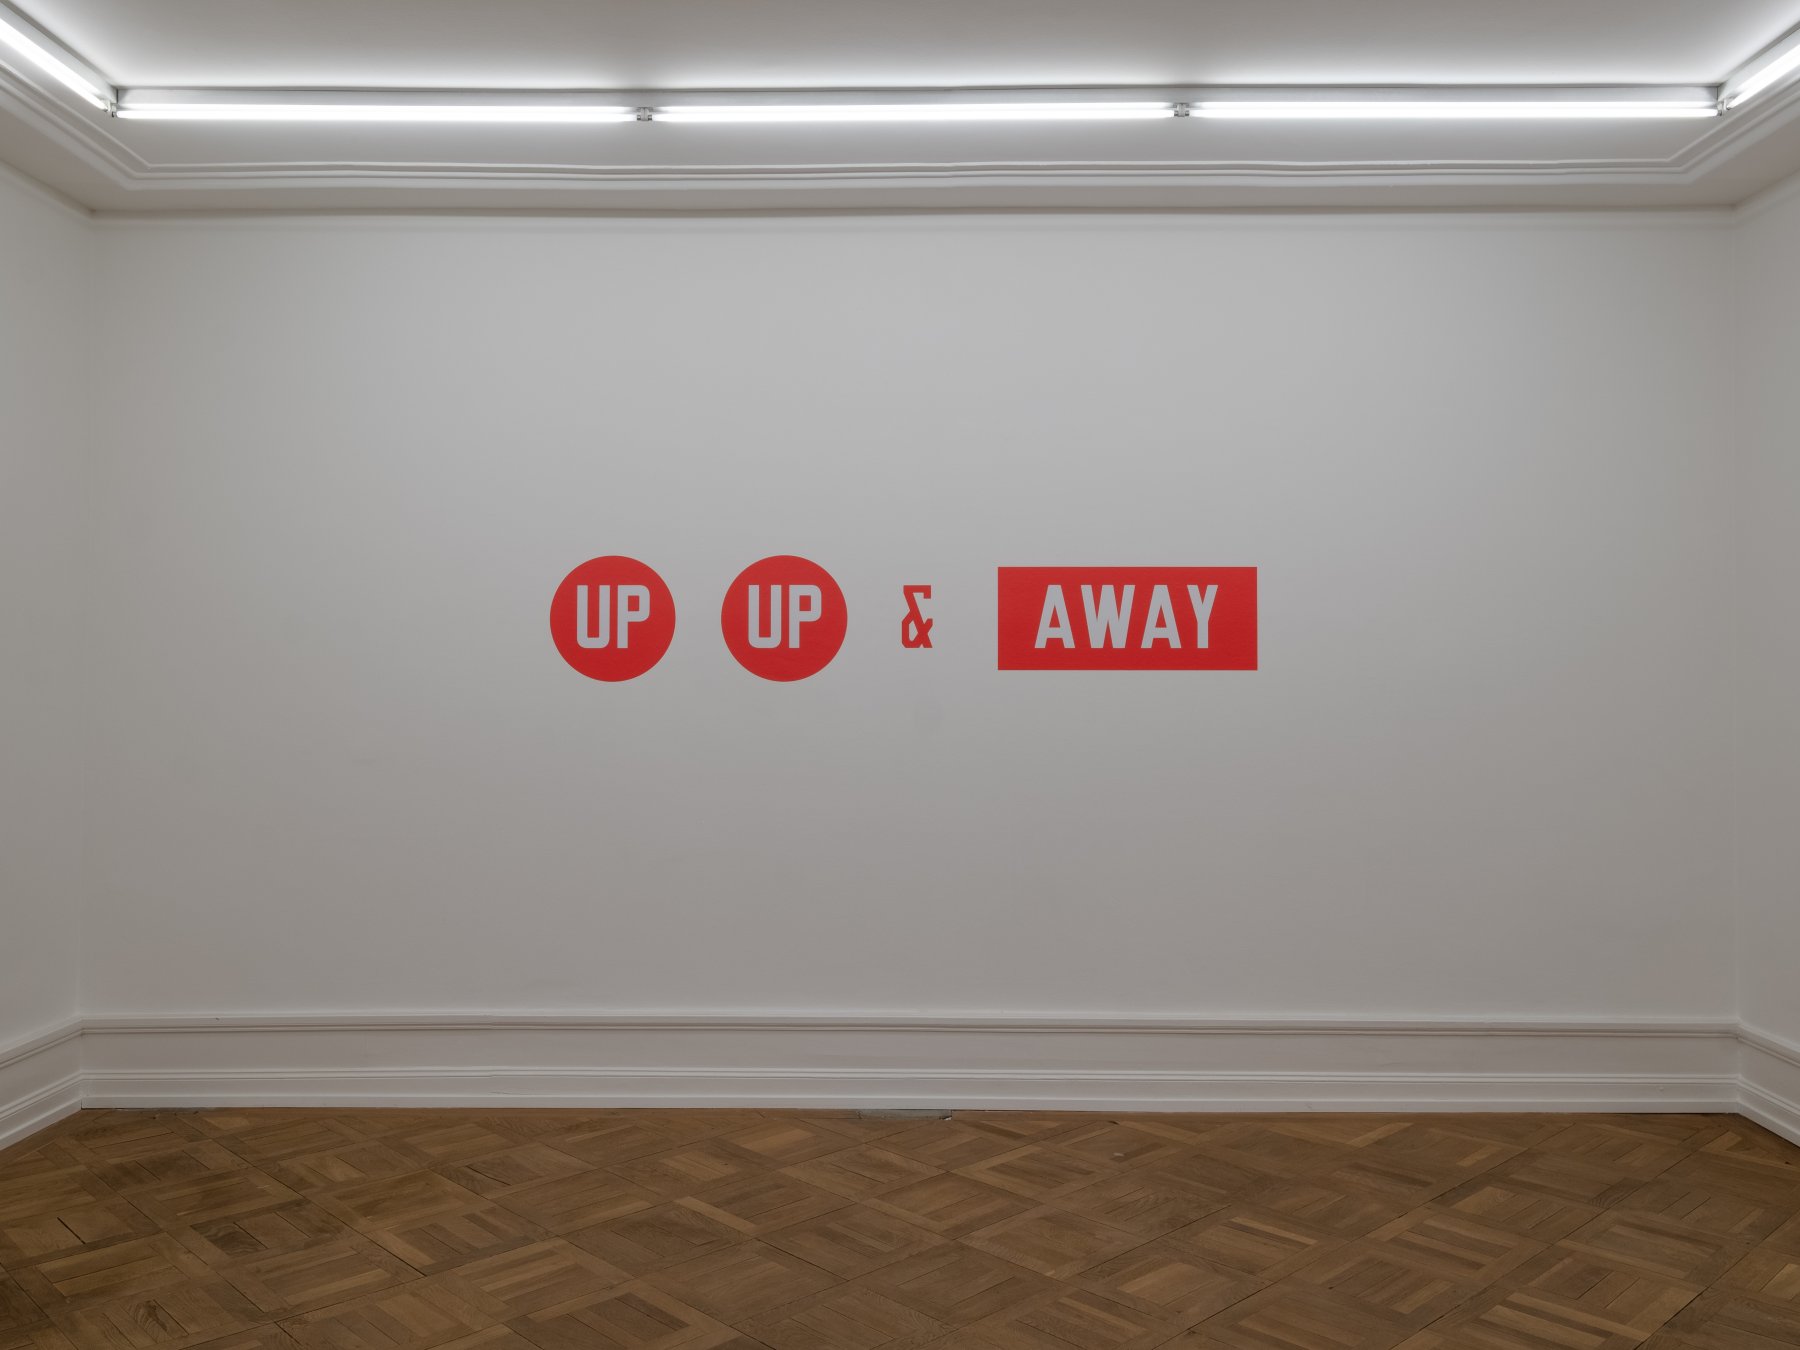 Lawrence Weiner, Show and Tell 割引サービス 本・音楽・ゲーム